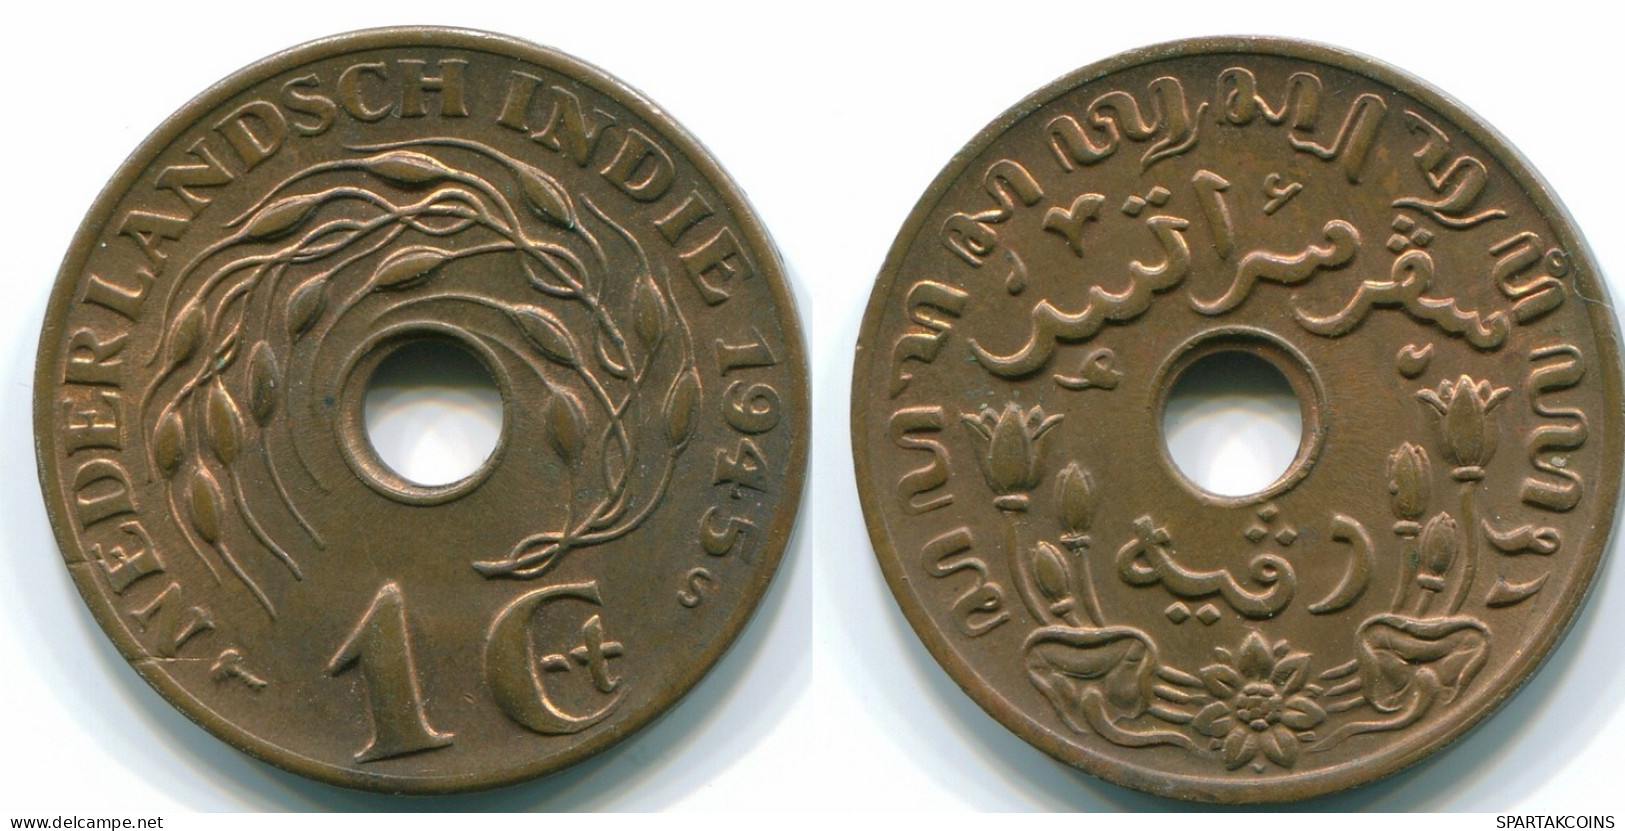 1 CENT 1945 S NETHERLANDS EAST INDIES INDONESIA Bronze Colonial Coin #S10442.U.A - Indes Néerlandaises